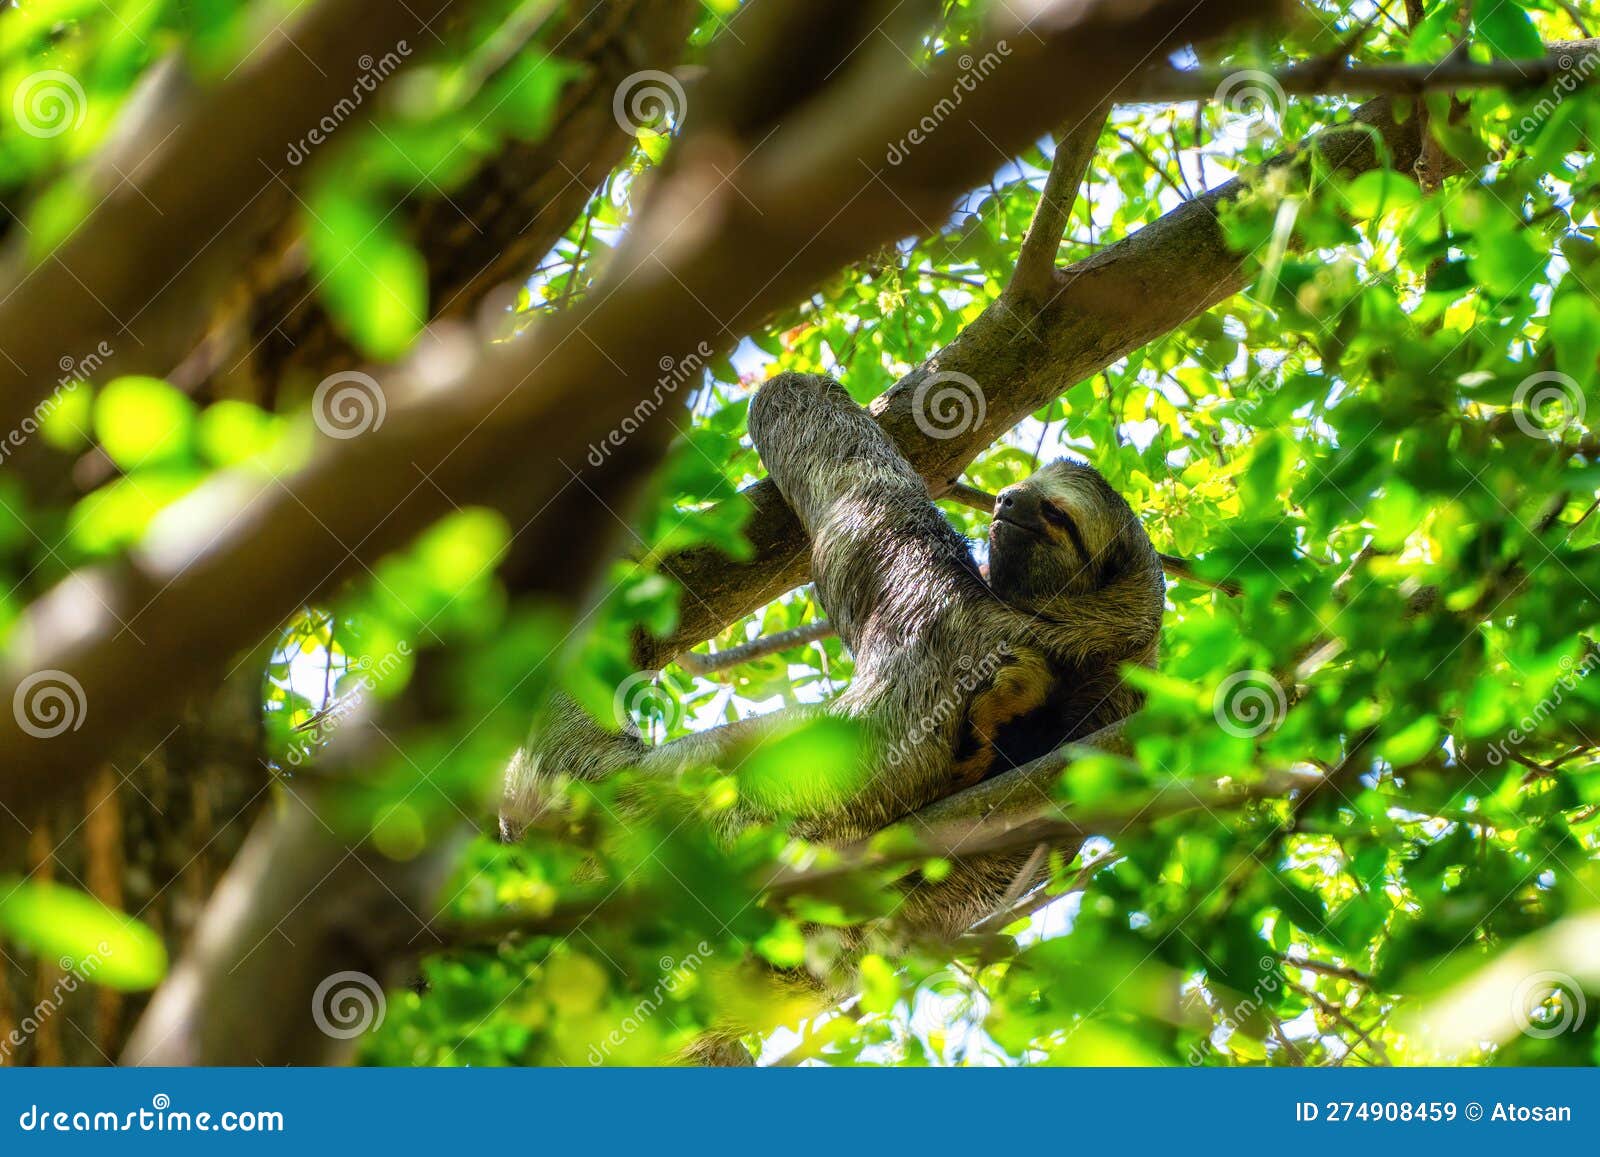 a sloth hanging from a tree in centenario park in cartagena